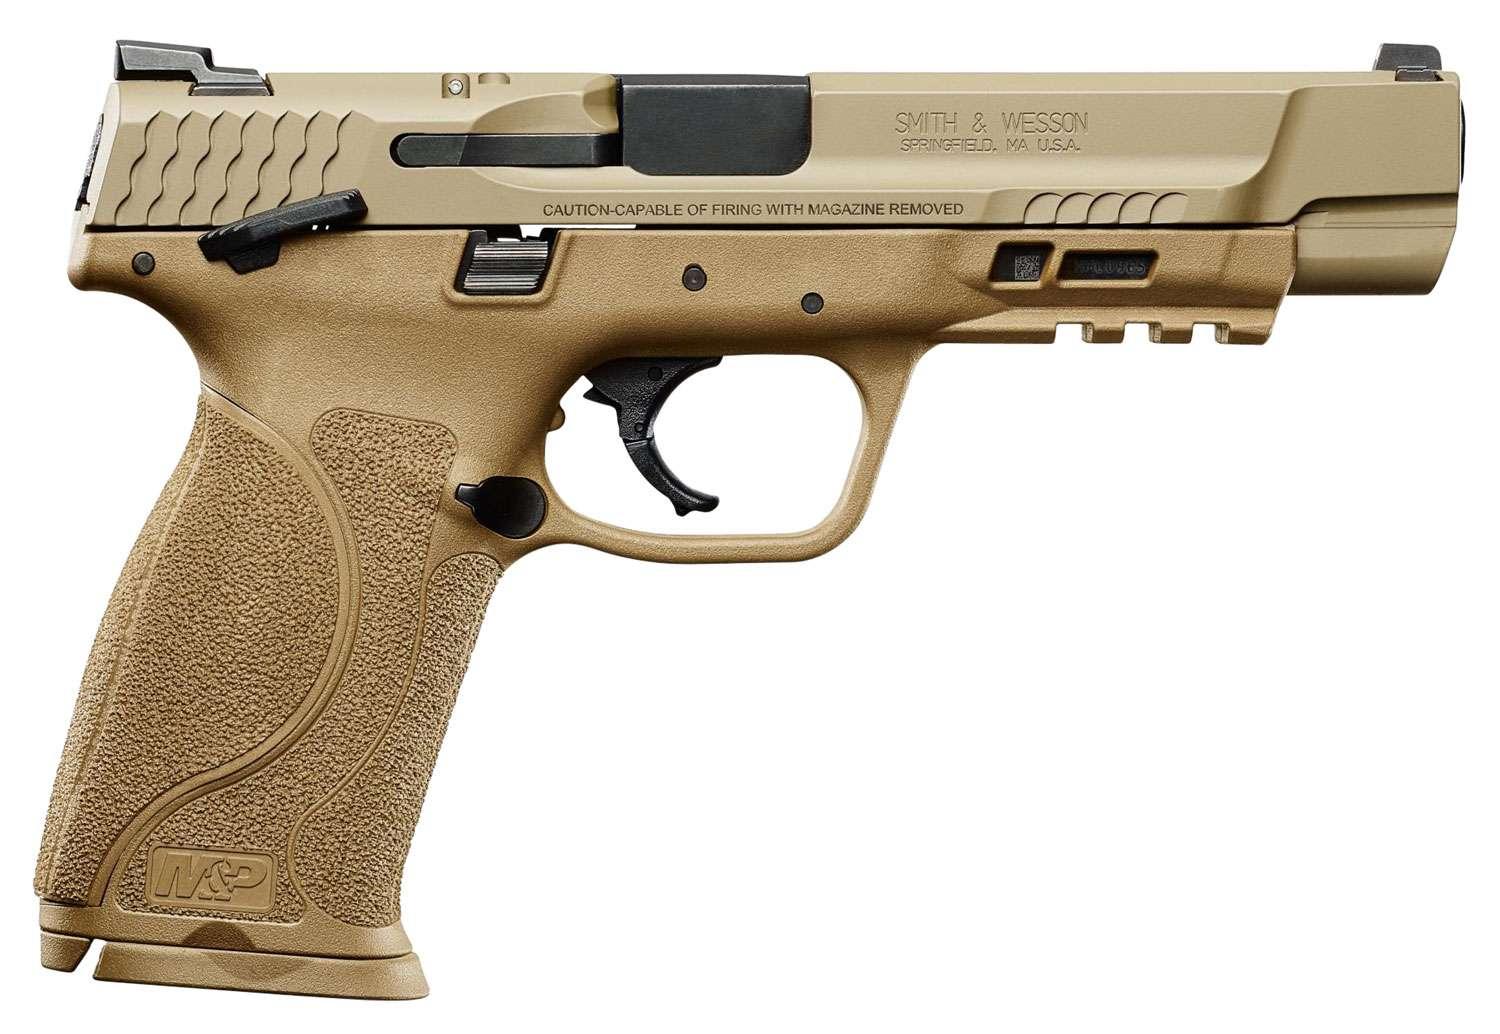 Smith & Wesson 11537 M&P M2.0 9mm Luger 5" 17+1 FDE Armornite Stainless Steel, FDE Interchangeable Backstrap Grip - $344.78 